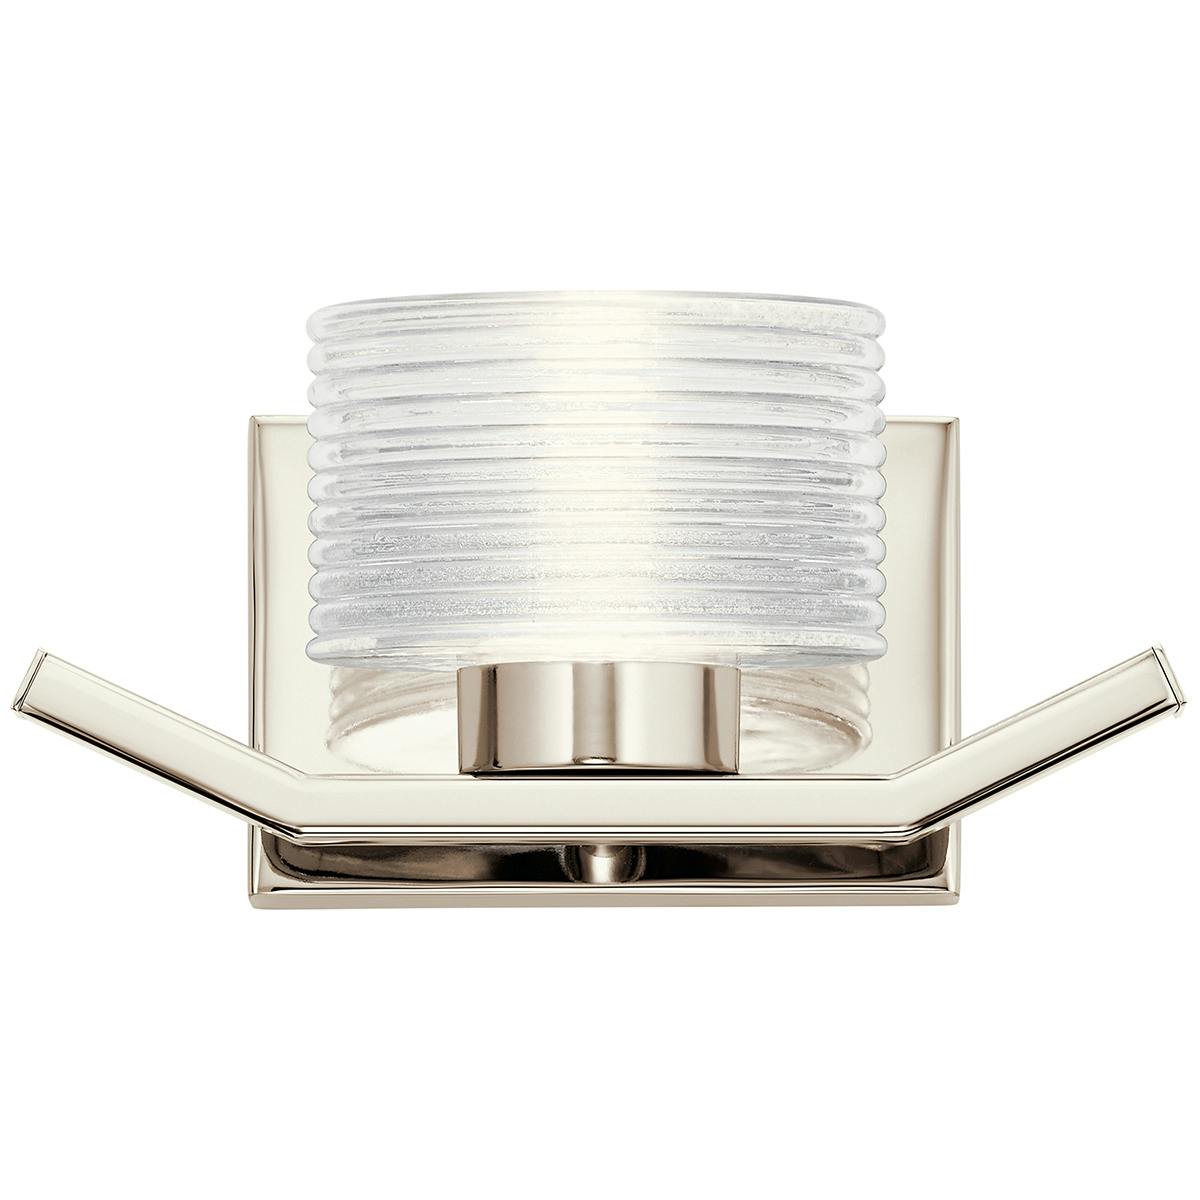 Front view of the Lasus 1 Light LED Sconce Polished Nickel on a white background